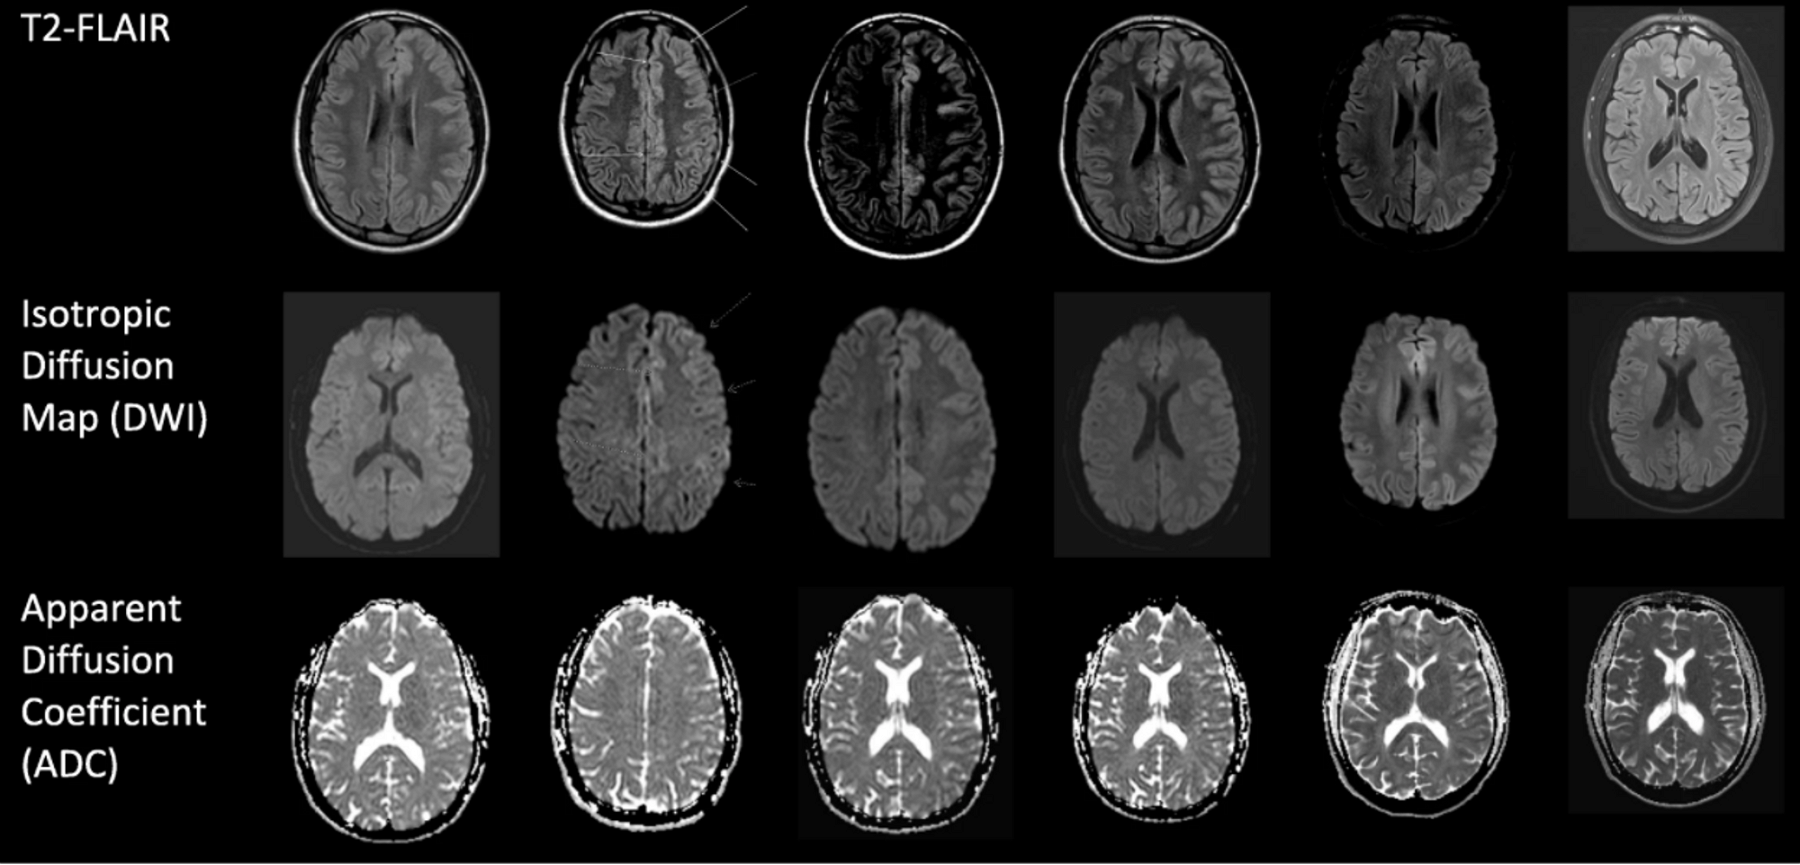 Figure 1: From Left to Right: MRI done on days 2, 4, 7, 11, 15, 154. MRI obtained on day 2 did not reveal any acute intracranial abnormality. However, scattered, non-enhancing punctate T2-FLAIR hyperintensities in subcortical white matter were present bilaterally in the frontal lobes. Day 4: Diffuse DWI and T2-FLAIR hyperintensities throughout the left cerebral hemisphere cortices, most pronounced over the lateral convexity. Possible associated T2 shine through rather than restricted diffusion. Associated sulcal effacement from gyral swelling. Day 7:Diffuse DWI and T2-FLAIR hyperintensities throughout the left cerebral hemisphere cortices similar to the MRI findings obtained on day 4. Subtle hypointensity on ADC in left cerebral hemisphere cortices and posterior temporal lobe. Day 11: Diffuse DWI and T2-FLAIR hyperintensities throughout the left cerebral hemisphere cortices similar to previous MRI findings. Mild hypointensity on ADC in the left cerebral hemisphere cortices and temporal lobe is more prominent compared to previous MRIs. Day 15: Diffuse DWI and T2-FLAIR hyperintensities throughout the left cerebral hemisphere cortices similar to previous MRIs. Mild hypointensity on ADC in left cerebral hemisphere cortices is even more prominent compared to previous MRIs. Day 154:Previously demonstrated left cerebral hemisphere cortical swelling and restricted diffusion has resolved. No new parenchymal signal abnormality or abnormal enhancement. Scattered non-enhancing punctate T2-FLAIR hyperintensities were present in subcortical white matter of bilateral frontal lobes similar to the first MRI 